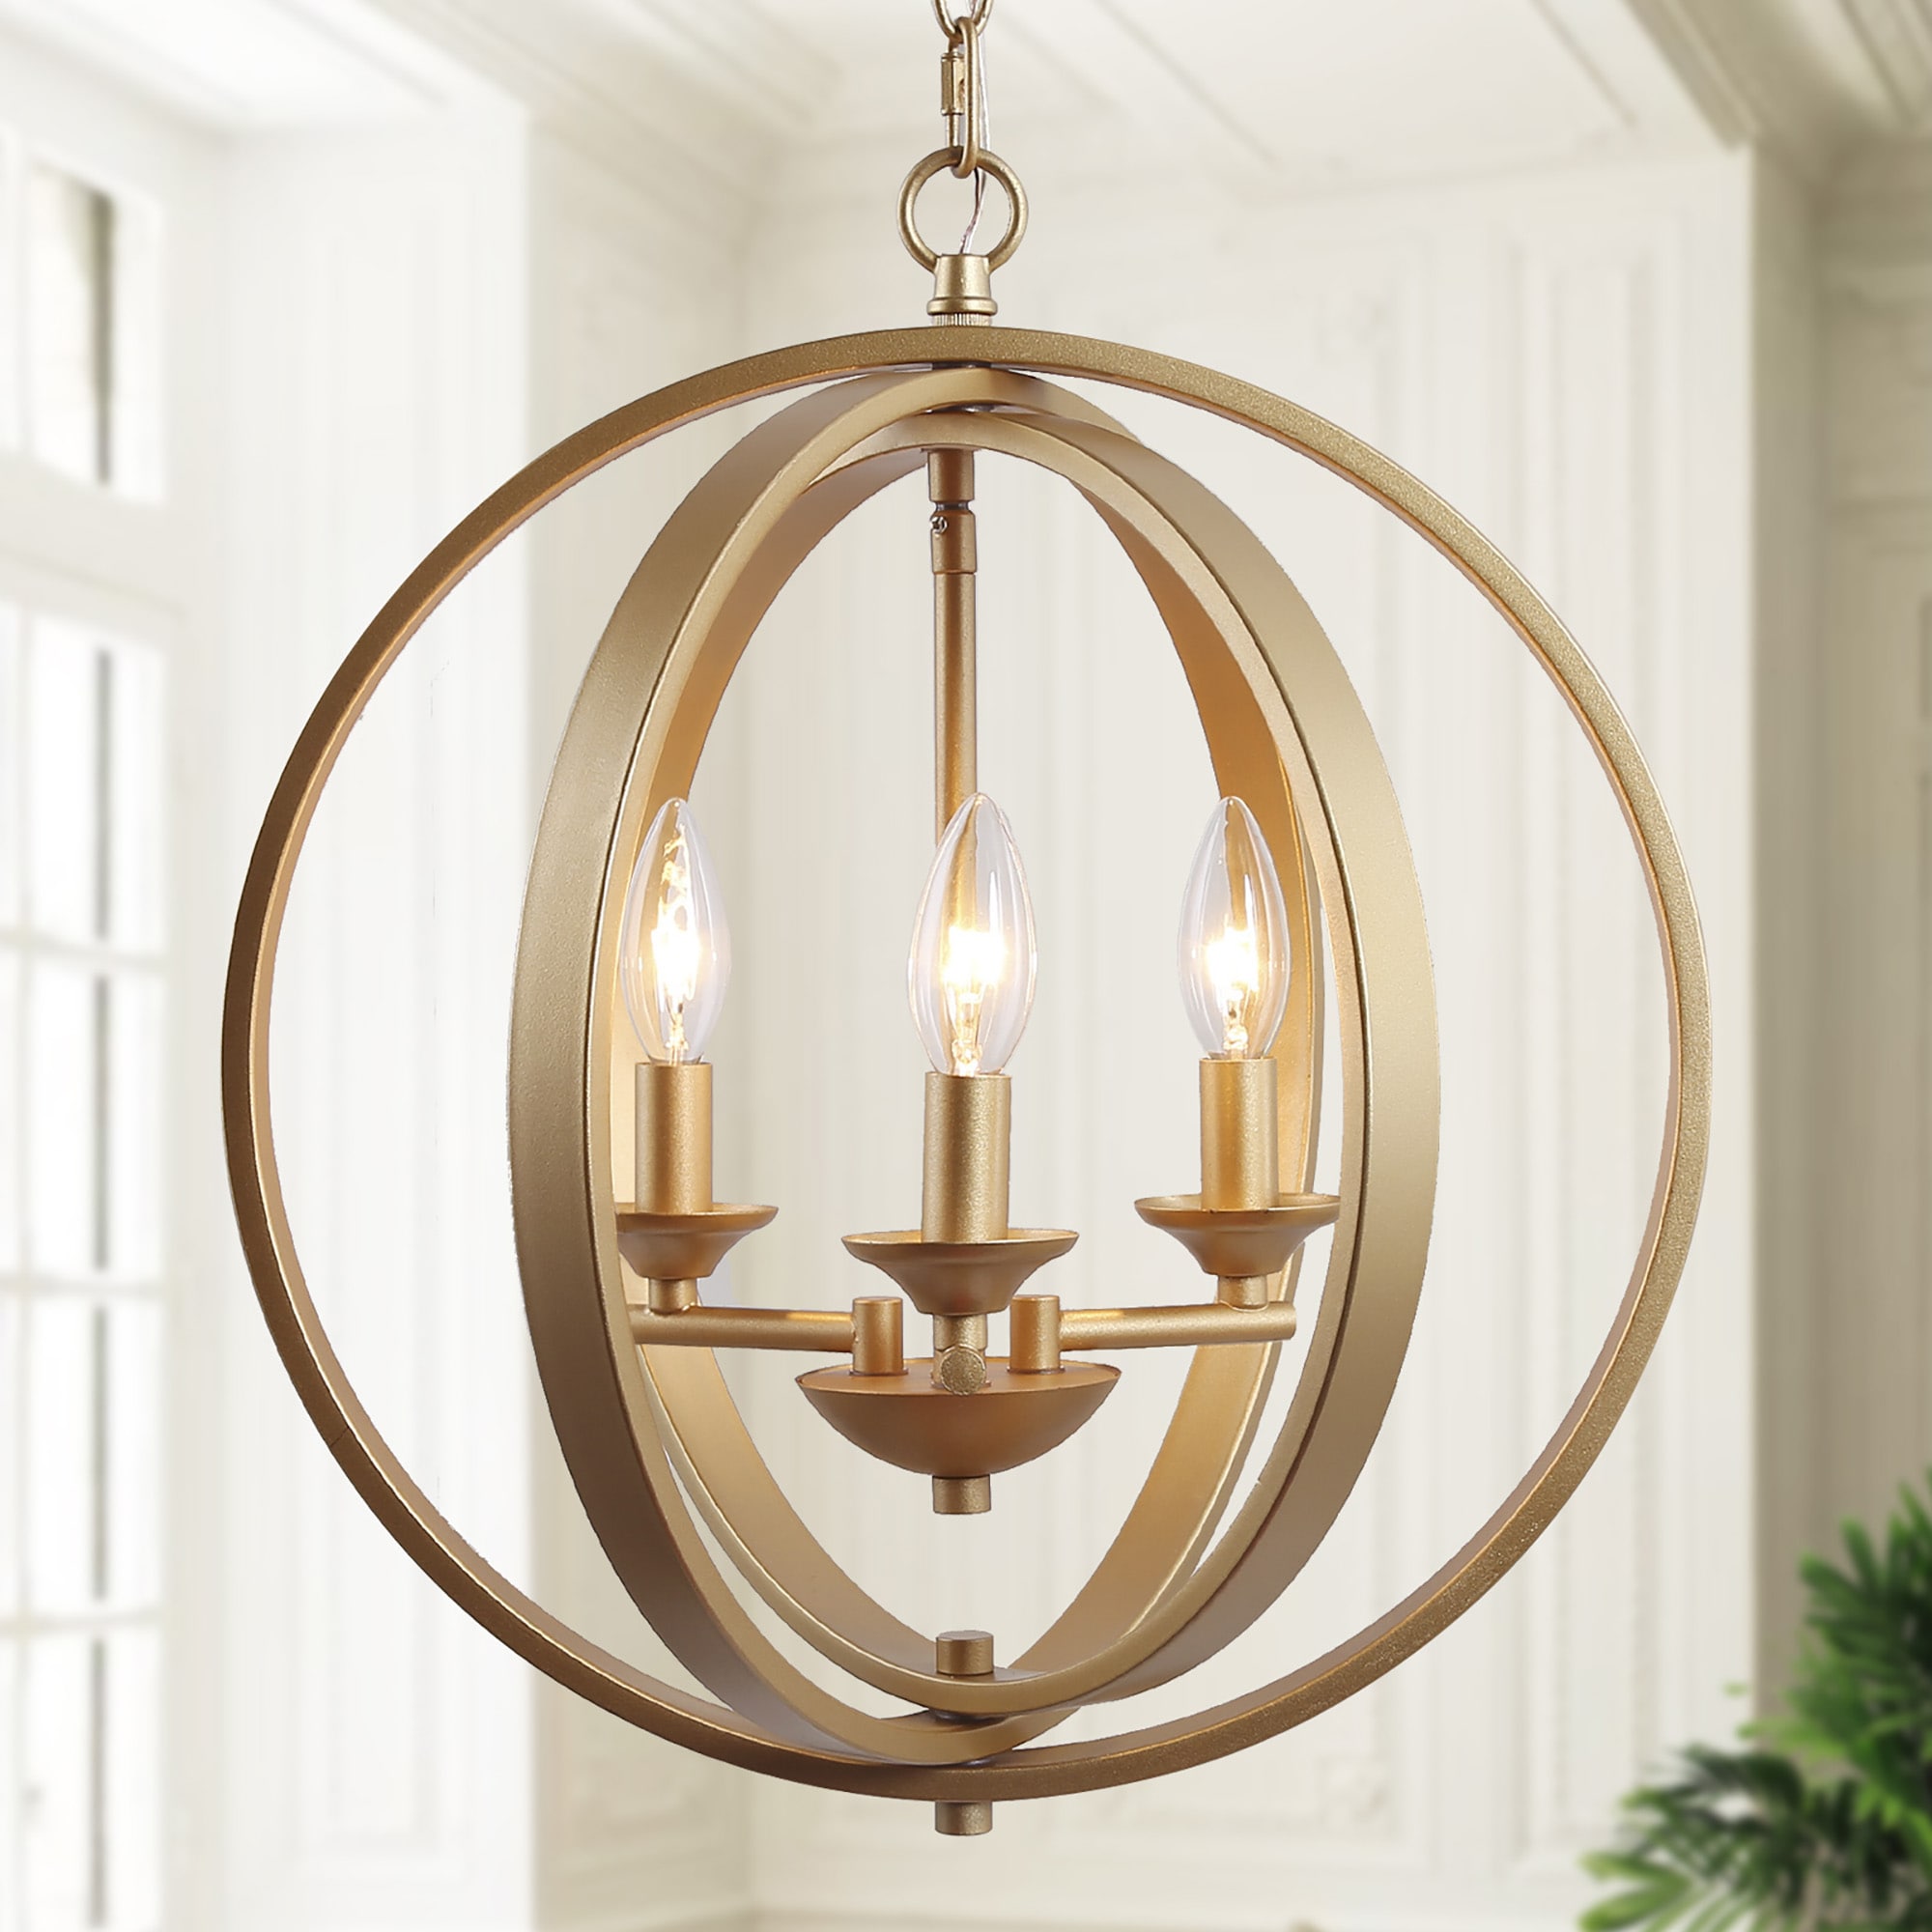 Uolfin 3-Light Gold Globe with the department Chandelier Style Classic in Candle rated Modern/Contemporary at Chandeliers LED Dry